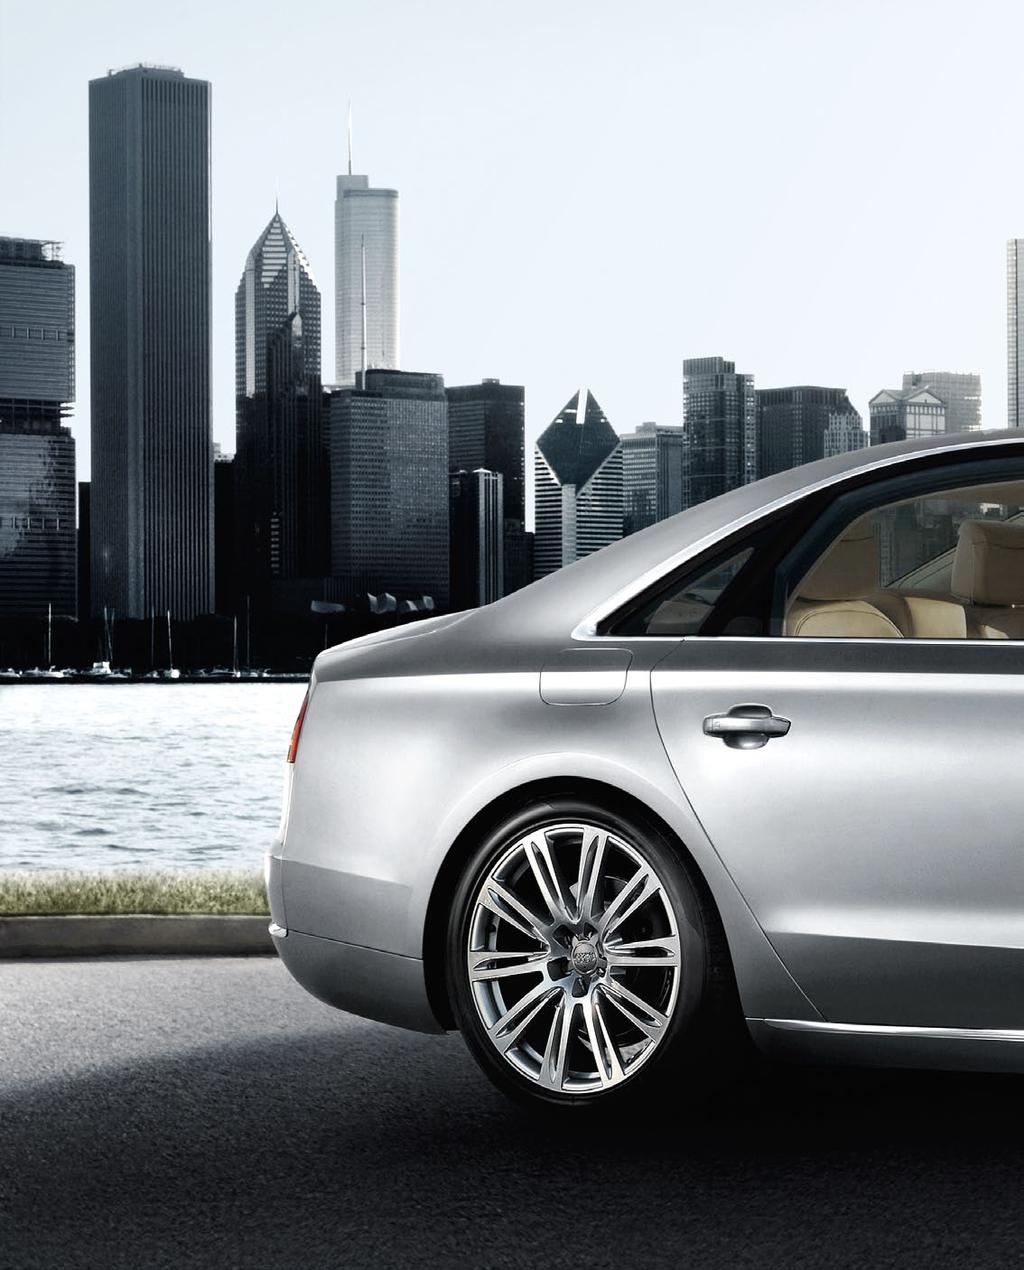 pinnacle With a long history as a performance-luxury icon, the progressive design, leading edge technology and outstanding capabilities of the A8 have given drivers a front row seat to pure luxury.